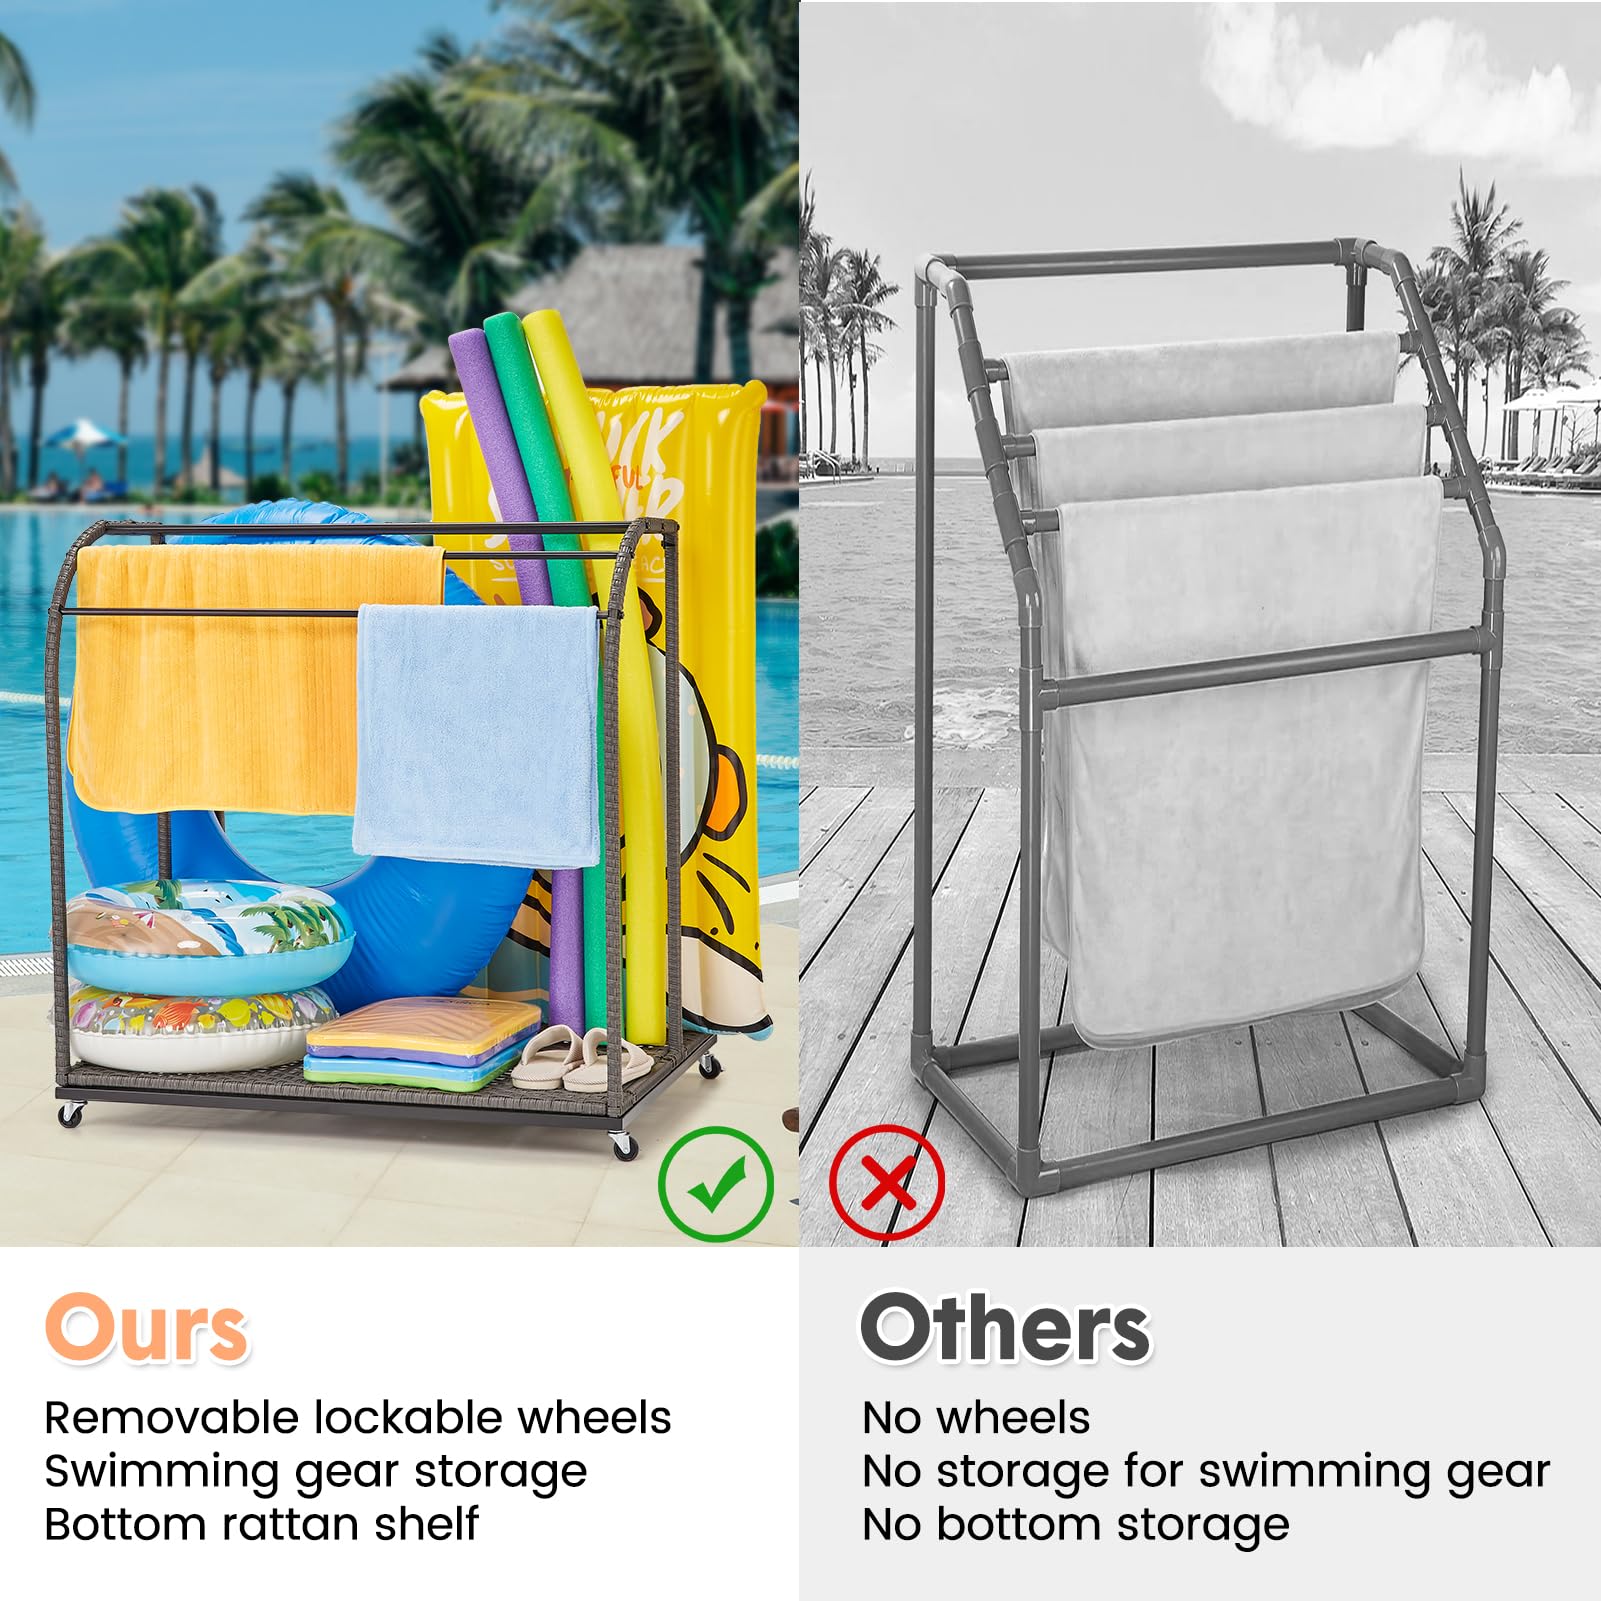 Poolside Outdoor Storage,Towel Rack Freestanding,Storage Organizer with Compartment for Floats, Pool Noodles, Swimming Rings,5 Bar Pool Towel Rack with Rattan Base for Outdoor/Indoor